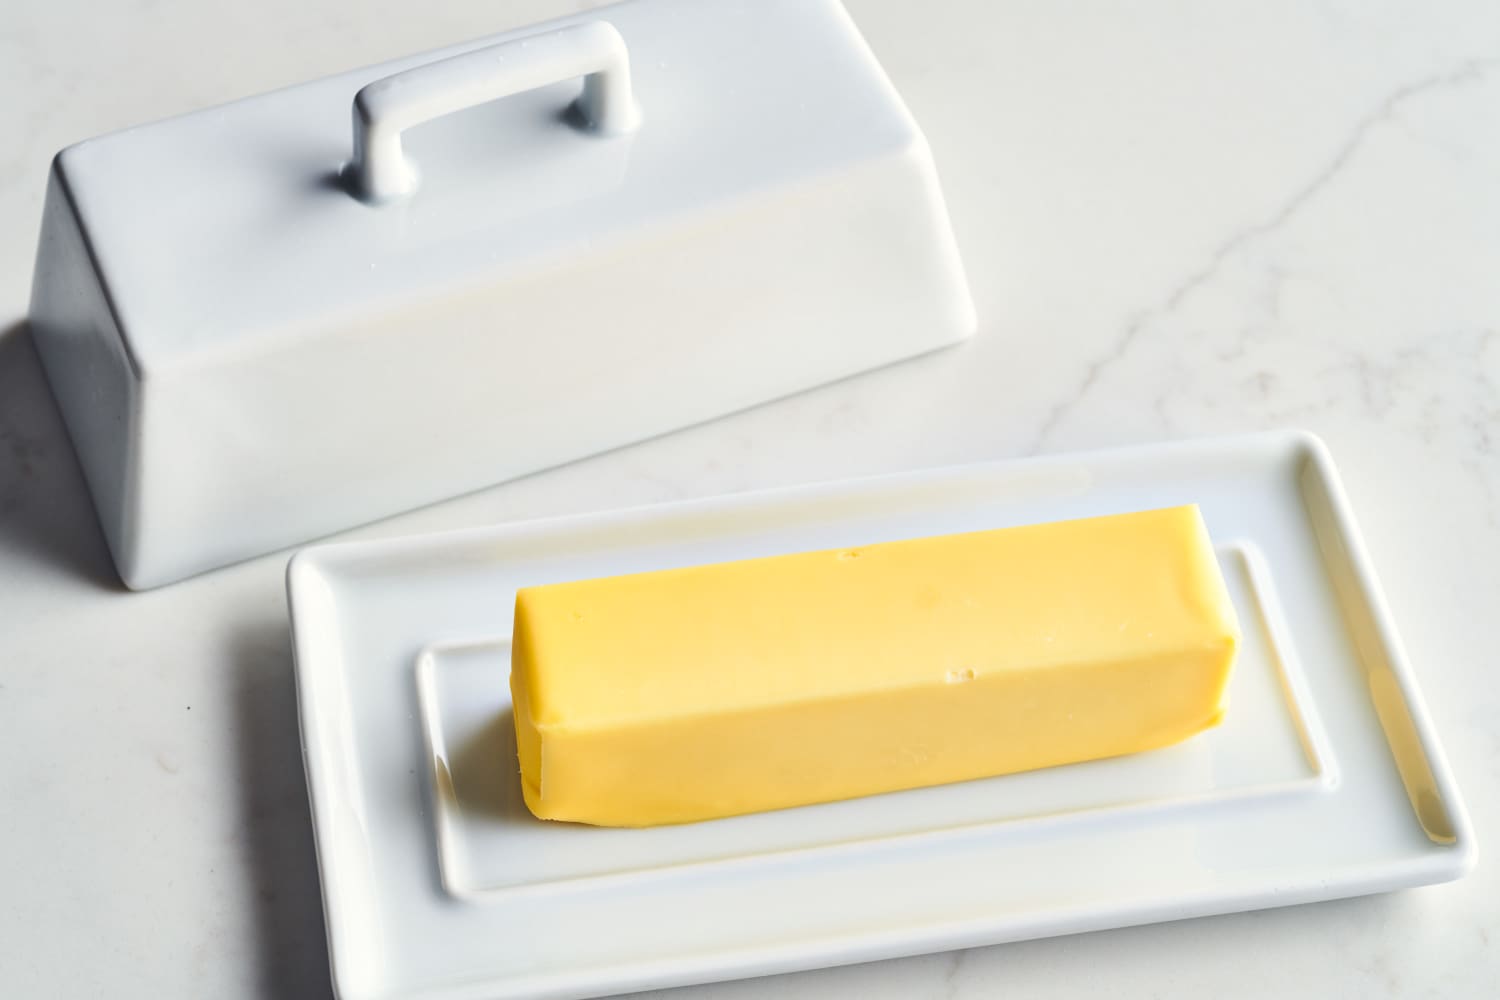 People Are Discovering This Brilliant Hack That Will Soften Butter in Just Five Minutes